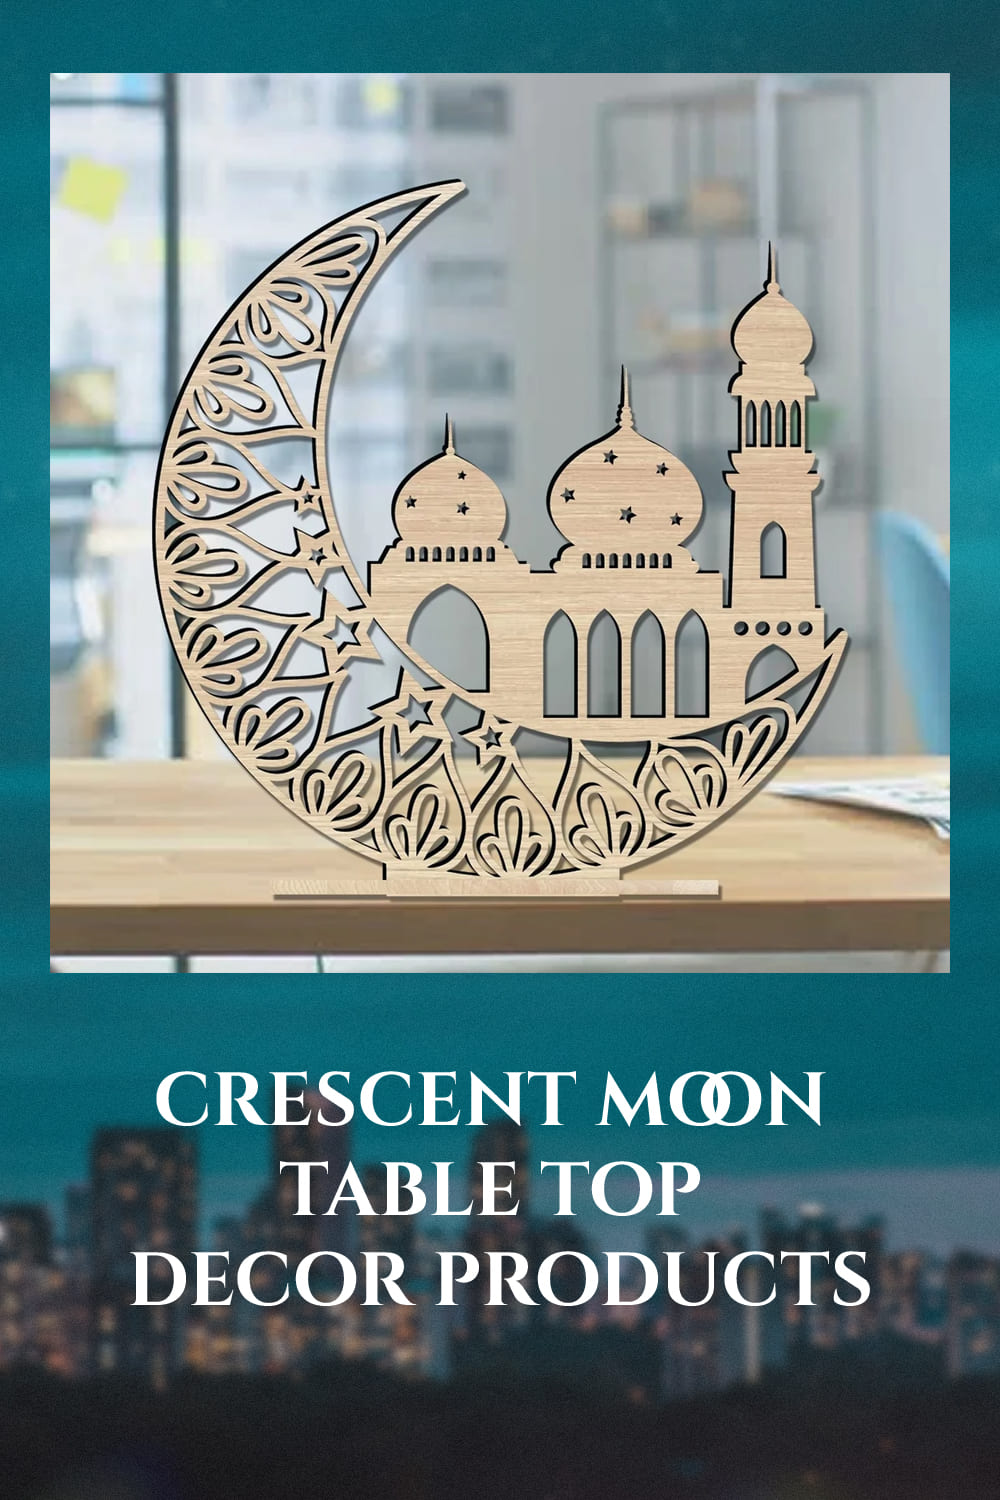 crescent moon table top decor products 1000h1500 02